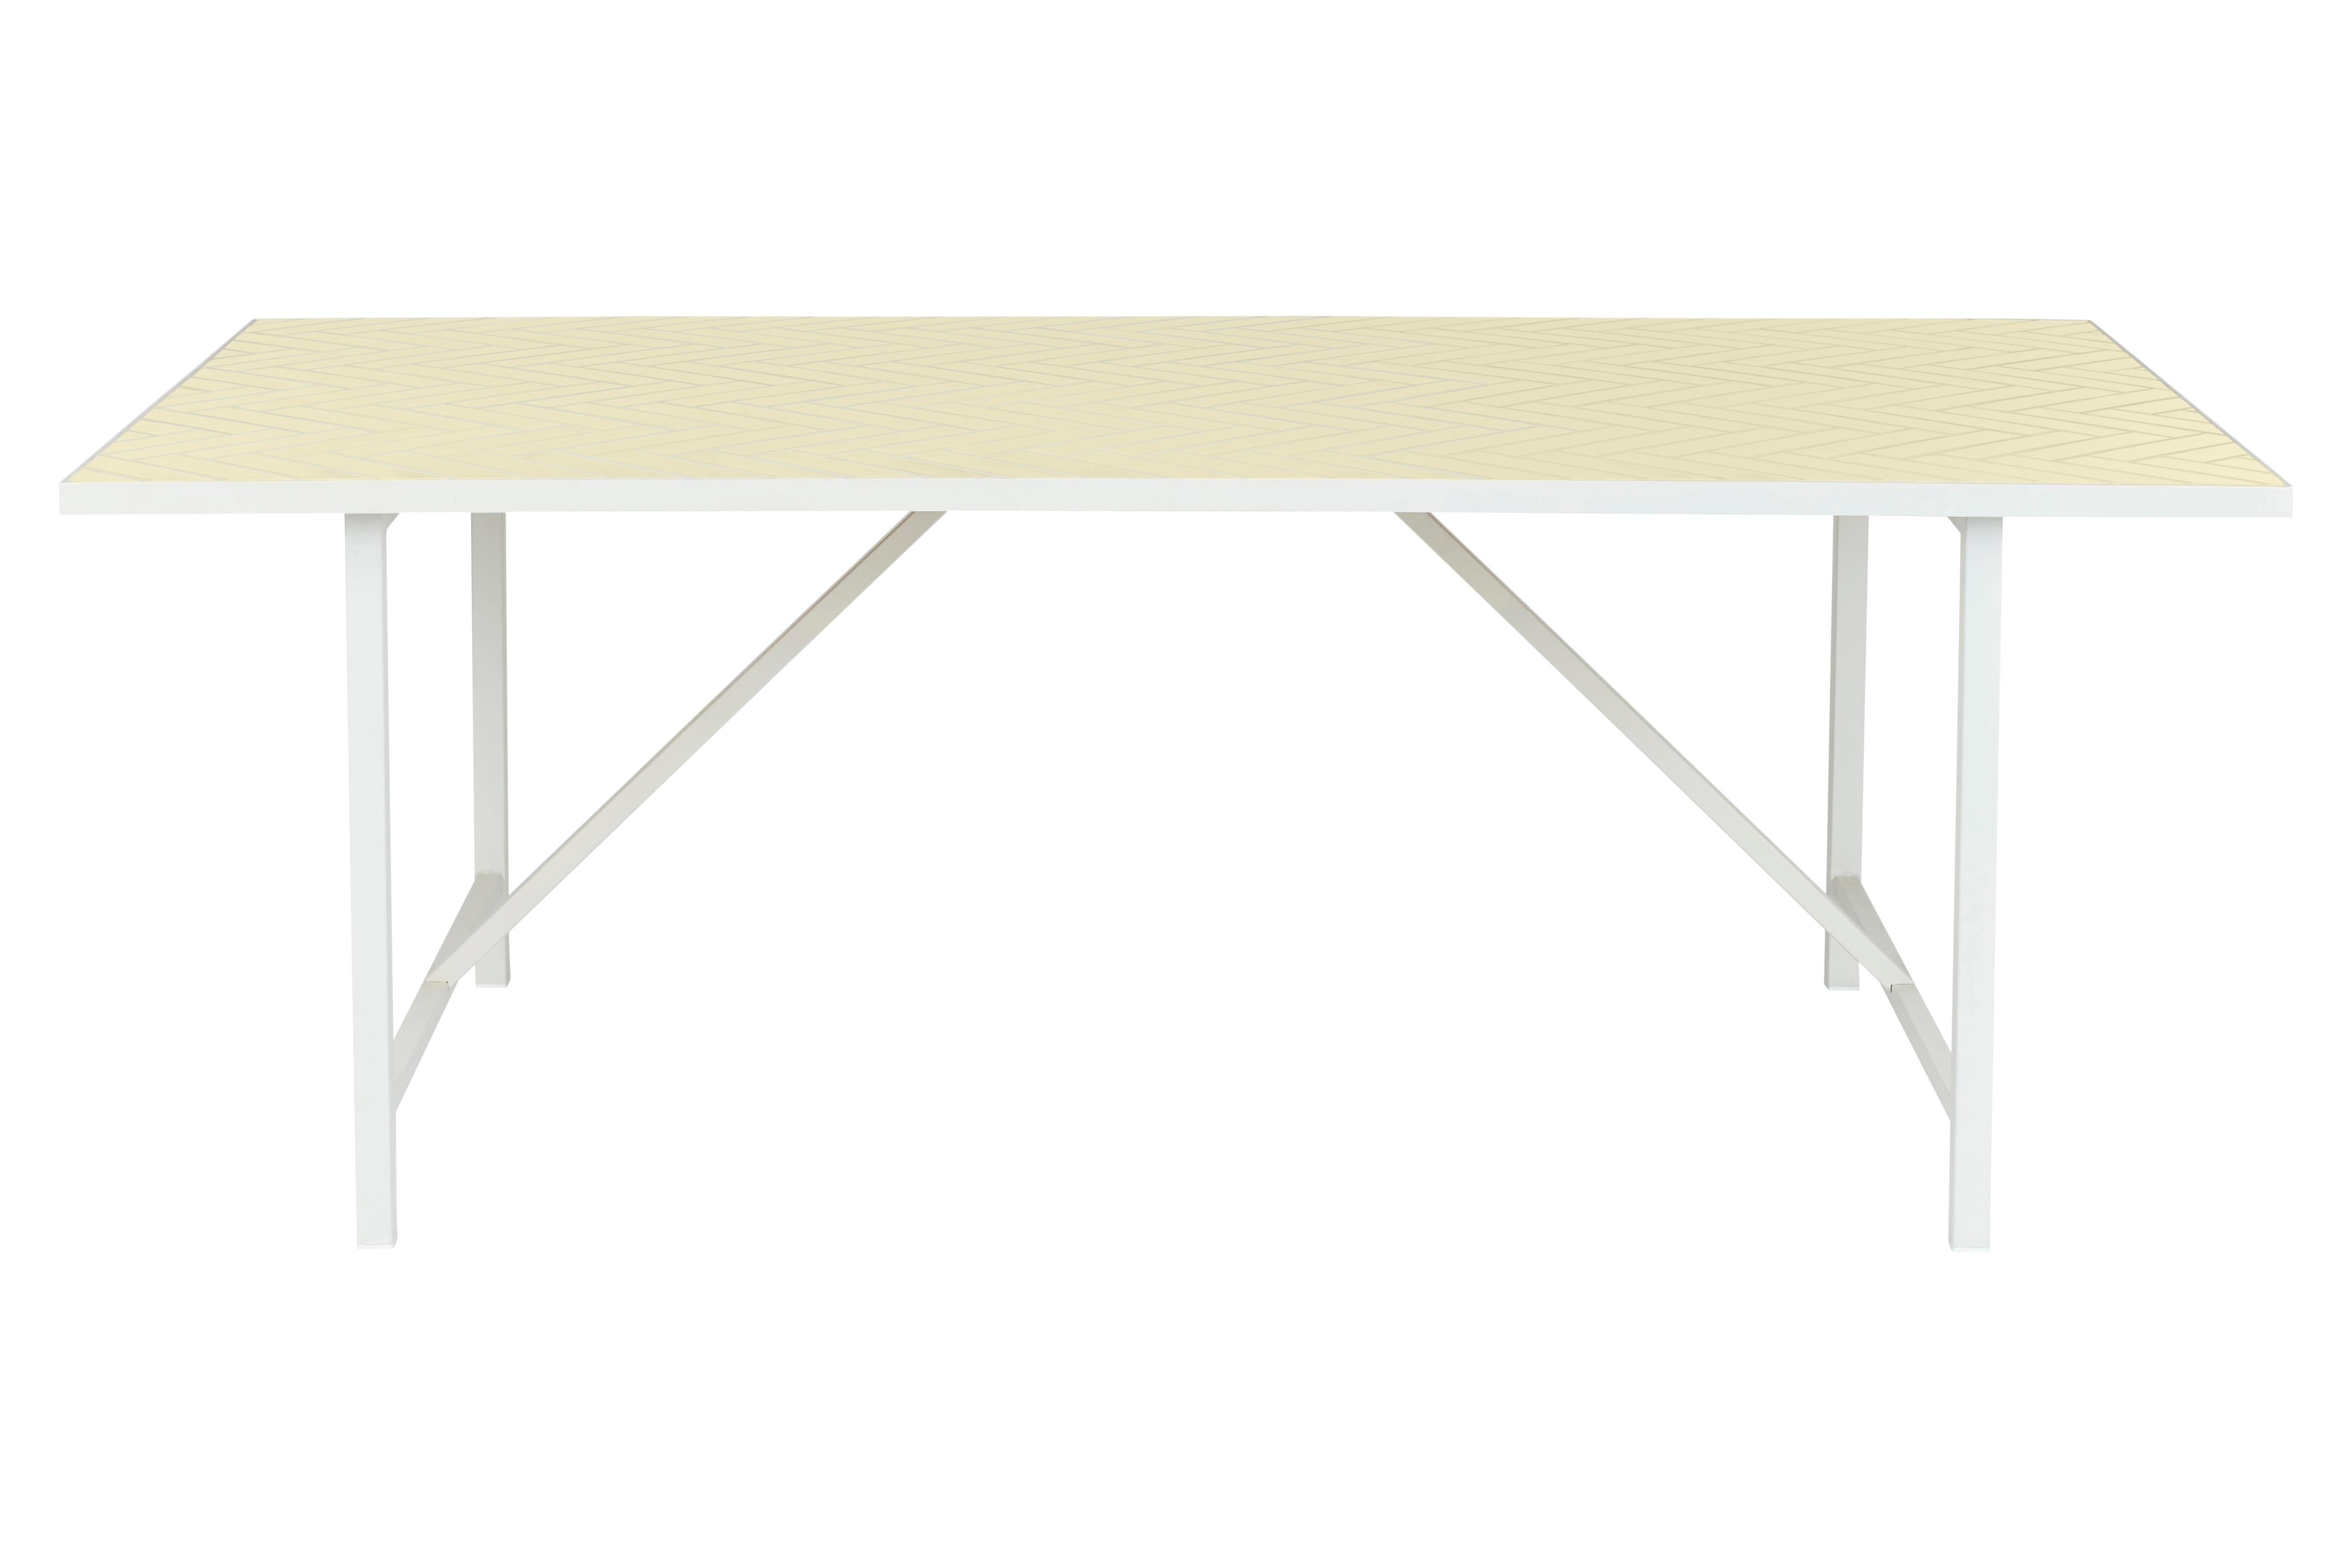 For Sale: Yellow (Butter yellow) Herringbone Dining Table, by Charlotte Høncke from Warm Nordic